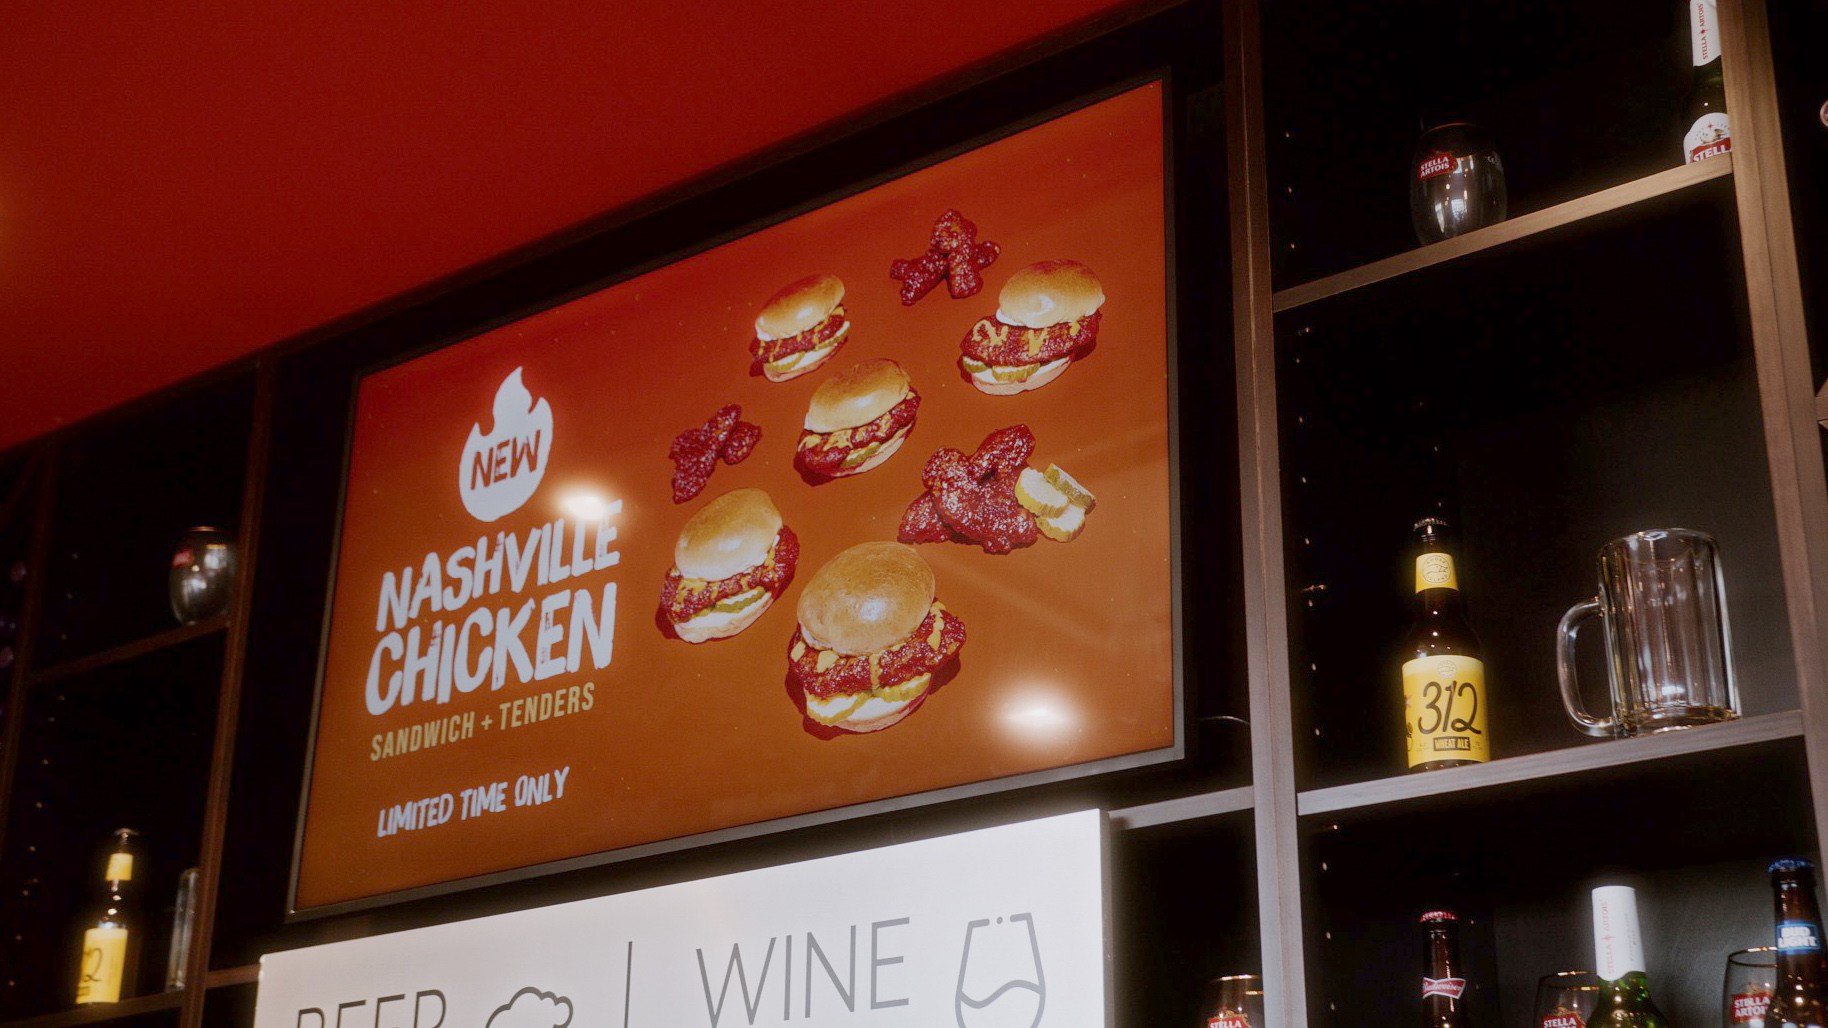 Samsung Display showing a picture of Nashville Chicken at Buona Beef restaurant